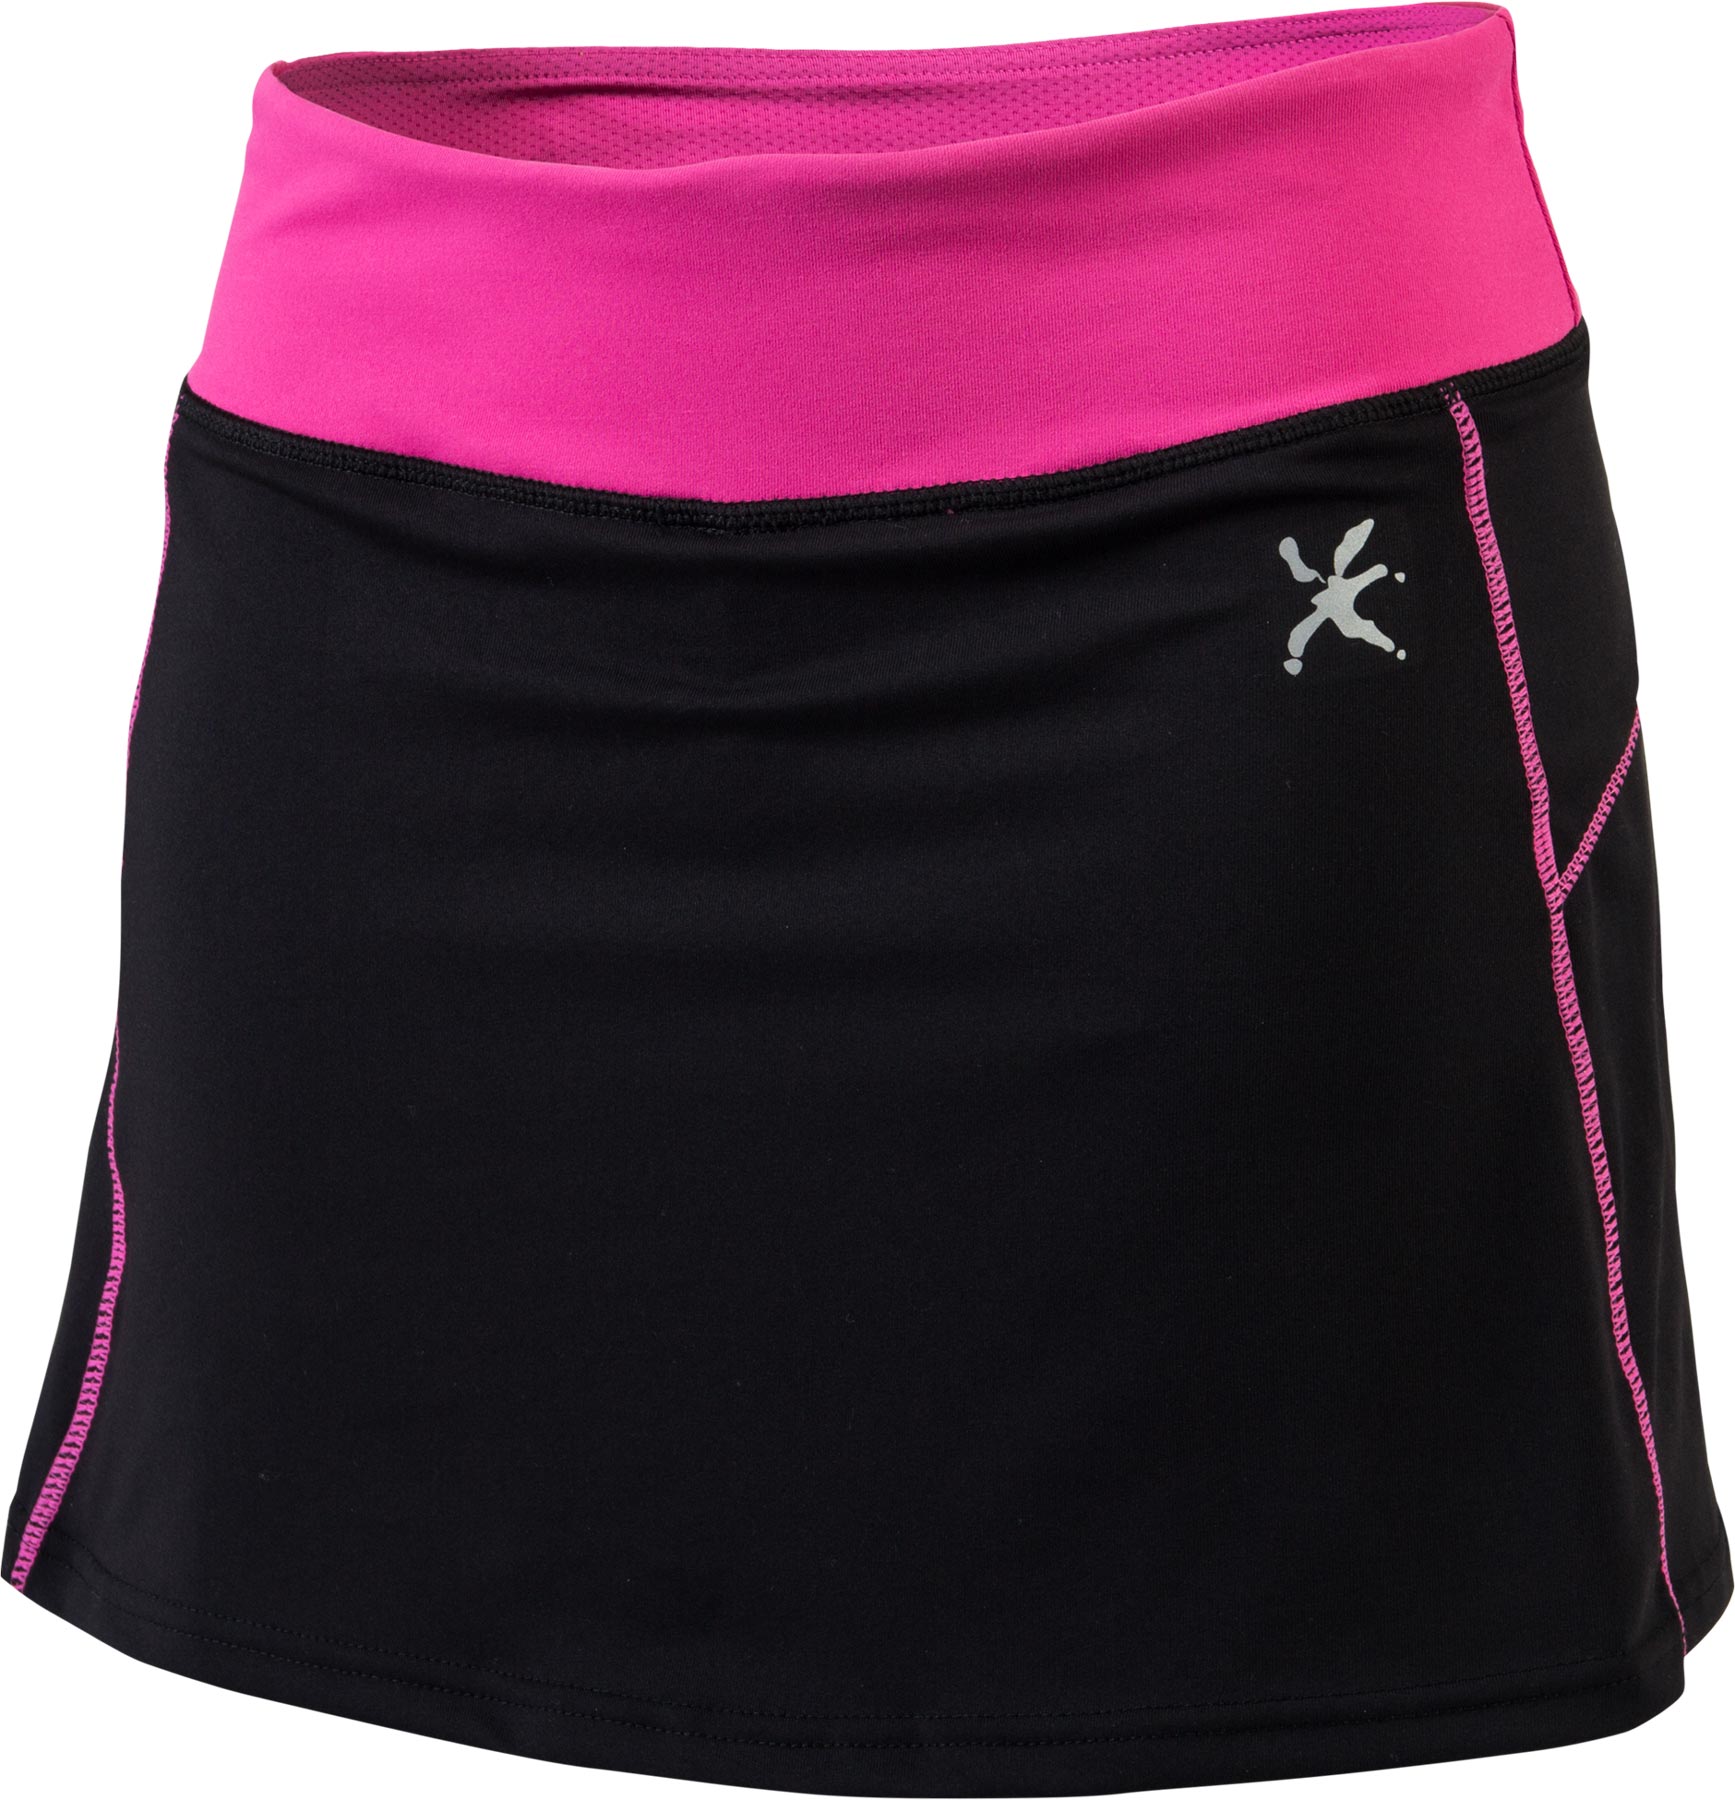 Sports skirt with built-in boxers